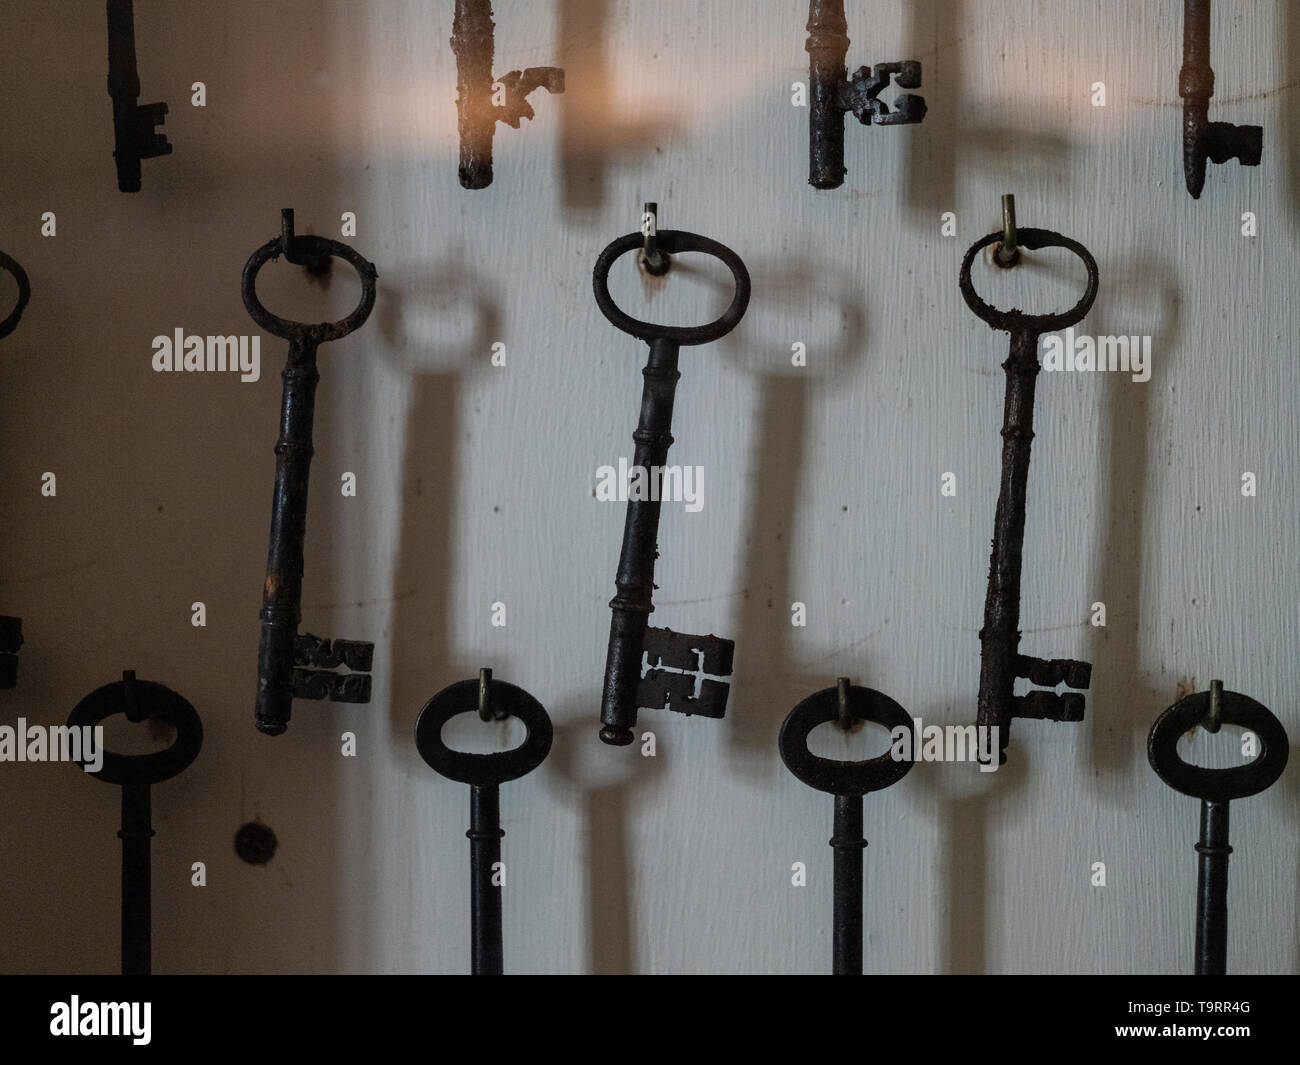 Keys in a glass display cabinet. Stock Photo